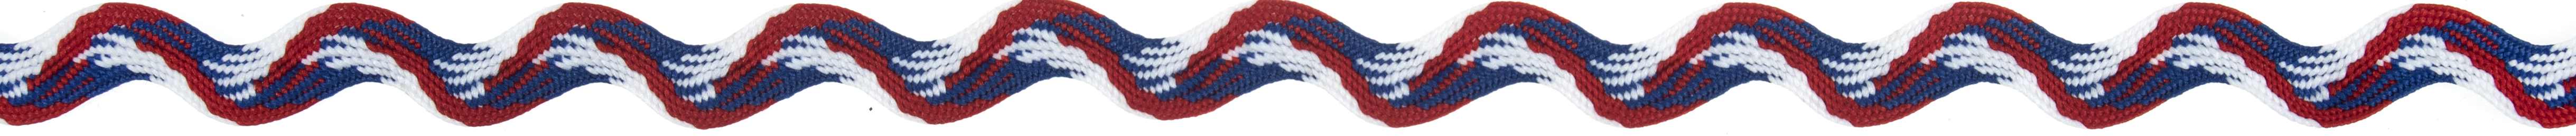 Picture of Ric Rac: Fancy Trim: Jumbo: 25m x 10mm: Red, White & Blue